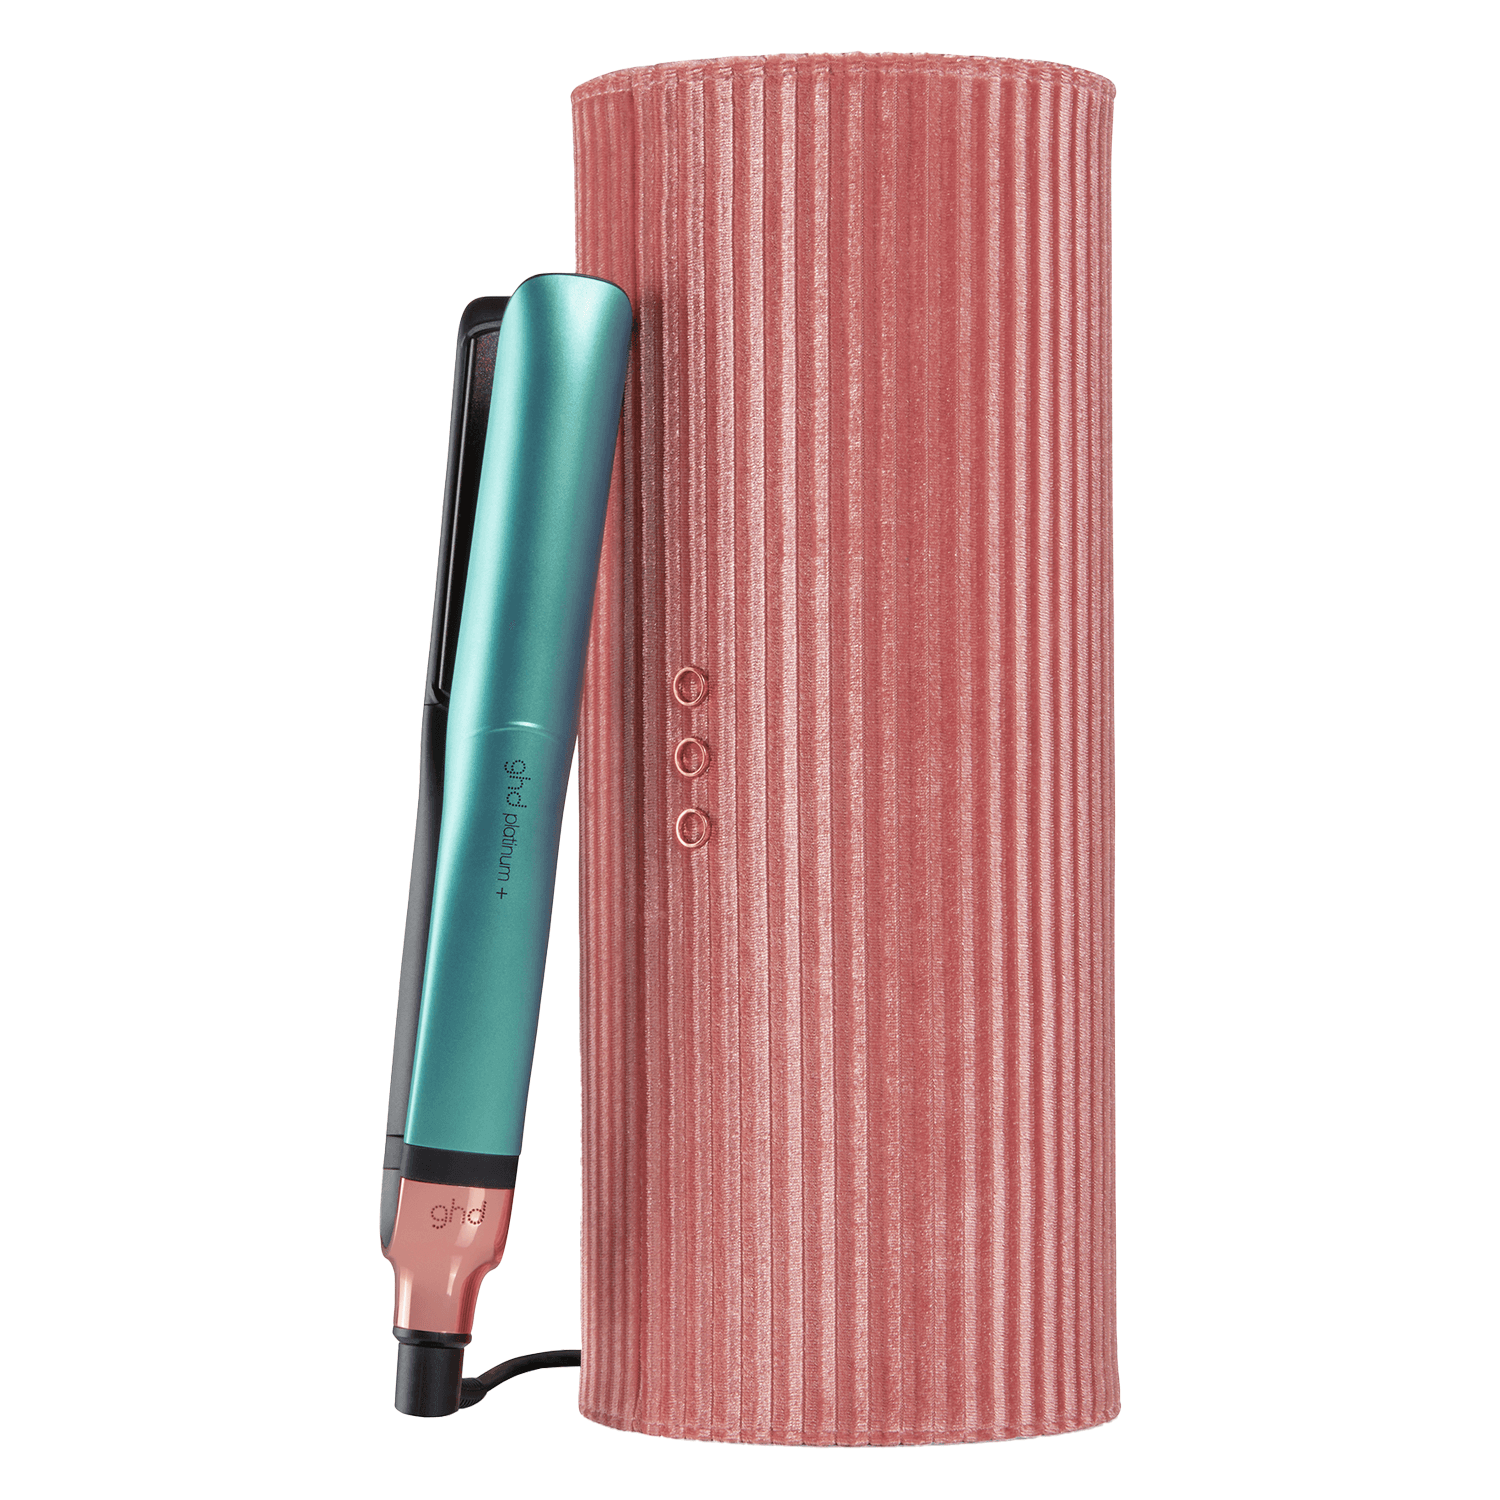 ghd tools - Dreamland Collection Le Platinum+